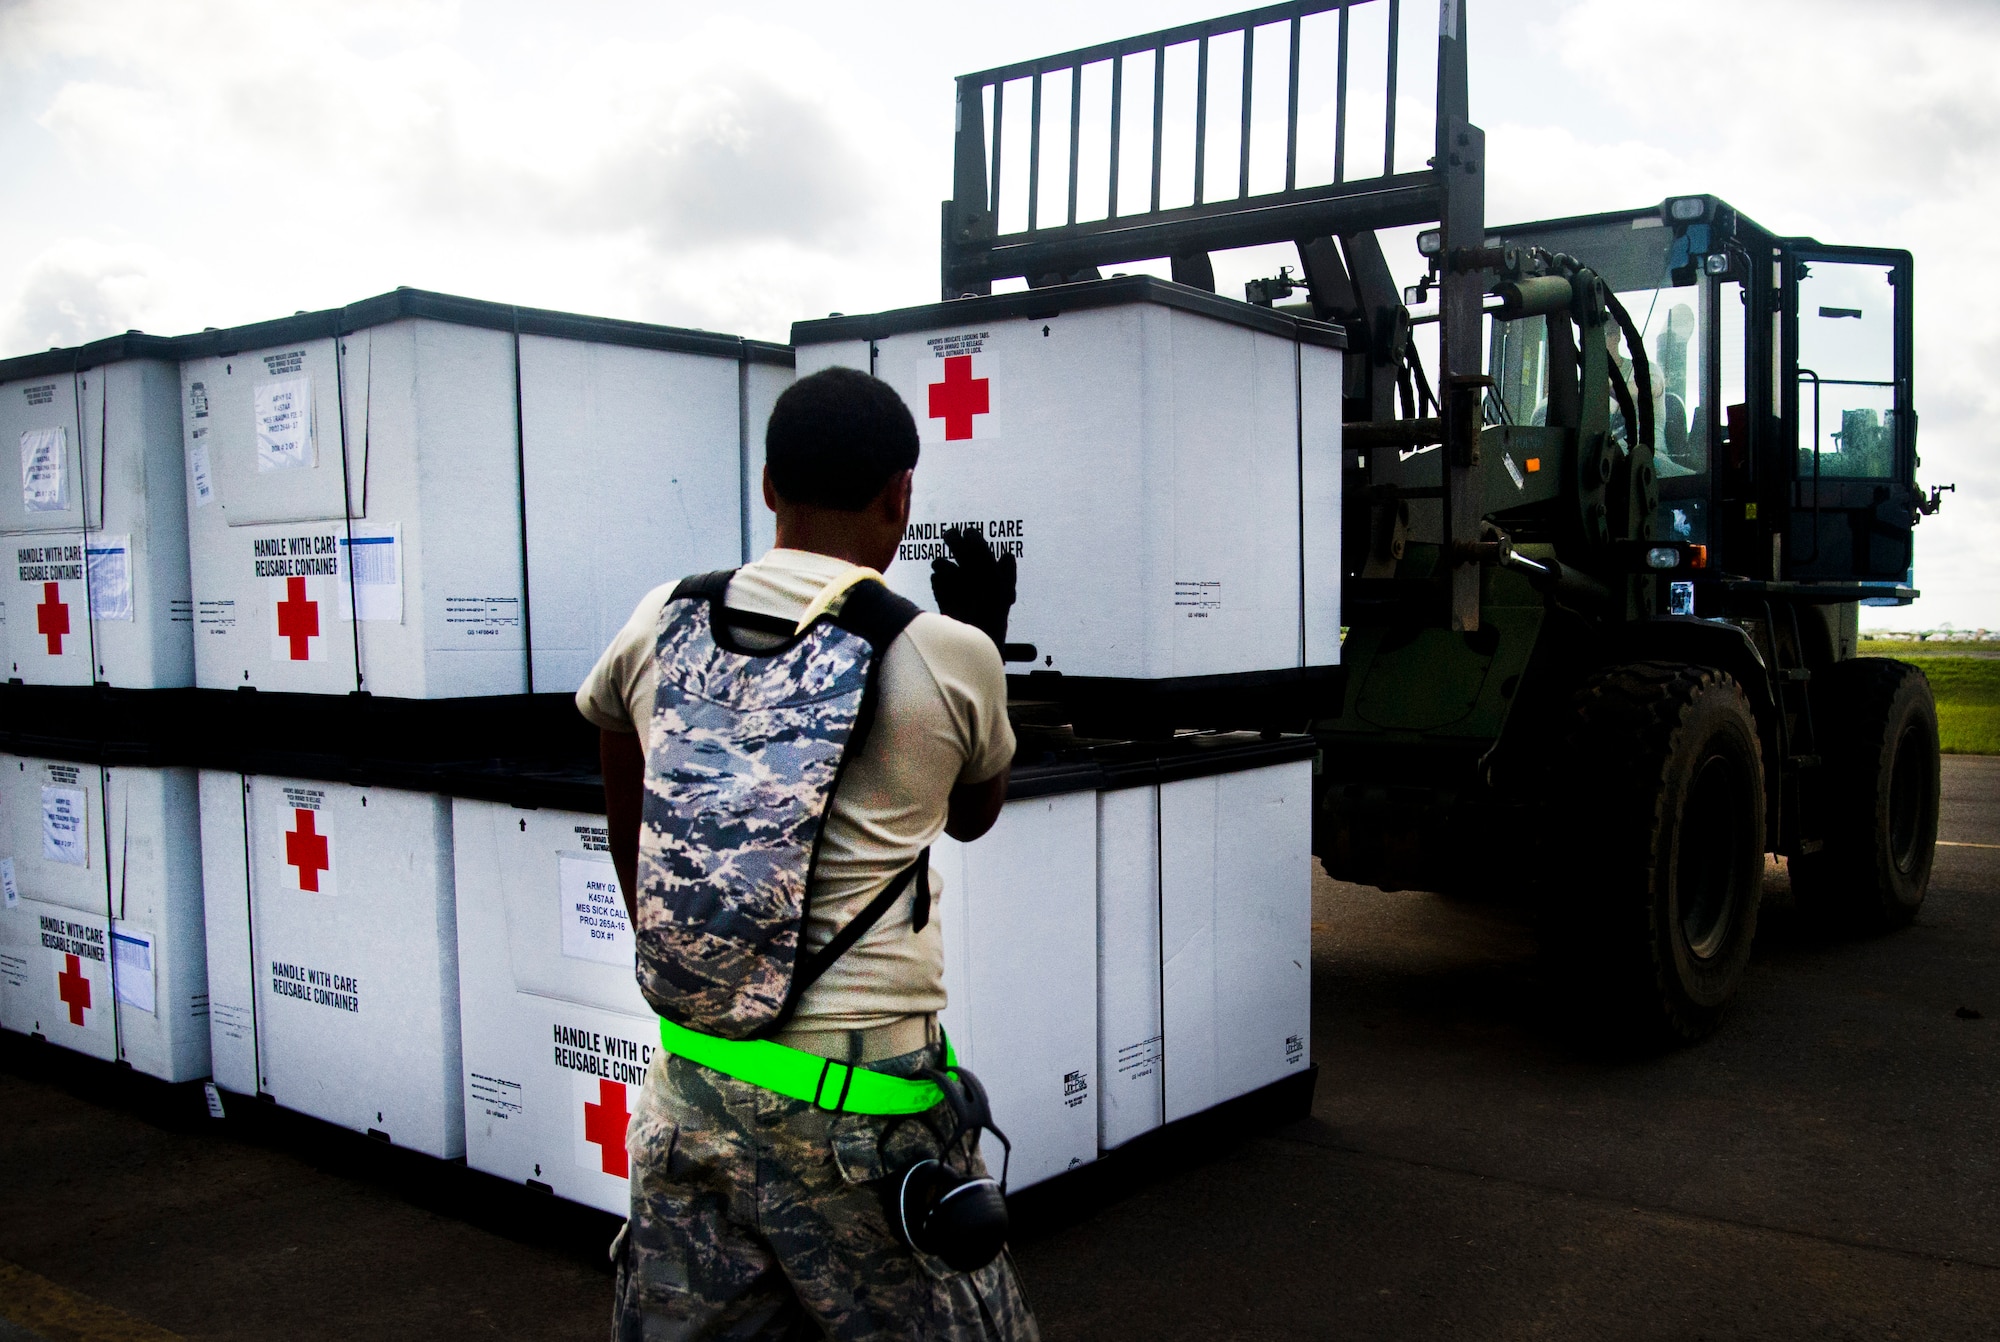 ROBERTS INTERNATIONAL AIRPORT, Republic of Liberia - U.S. Air Force Airmen part of the Joint Task Force-Port Opening team of the 621st Contingency Response Wing assigned to Joint Base McGuire-Dix-Lakehurst, N.J., finish unloading medical supplies during Operation UNITED ASSISTANCE here, October 16, 2014. The JTF-PO is supporting a comprehensive U.S. government effort led by the U.S Agency for International Development, to support the World Health Organization and other international partners to help the Governments of Guinea, Liberia, and Sierra Leone respond to and contain the outbreak of the Ebola virus in West Africa. (U.S. Air Force photo/Staff Sgt. Gustavo Gonzalez/RELEASED)